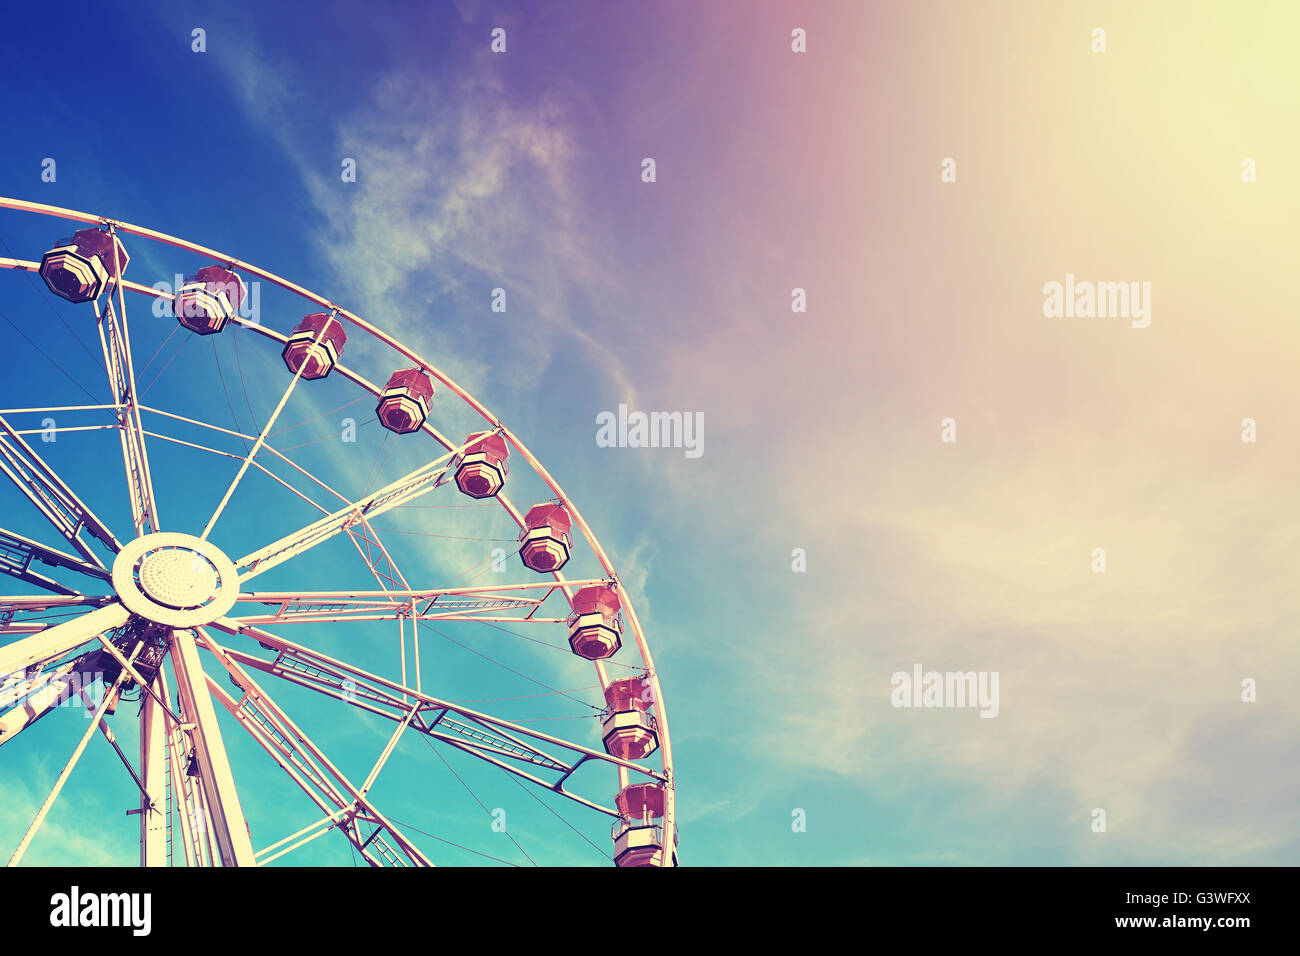 Vintage stylized ferris wheel at sunset, space for text. Stock Photo